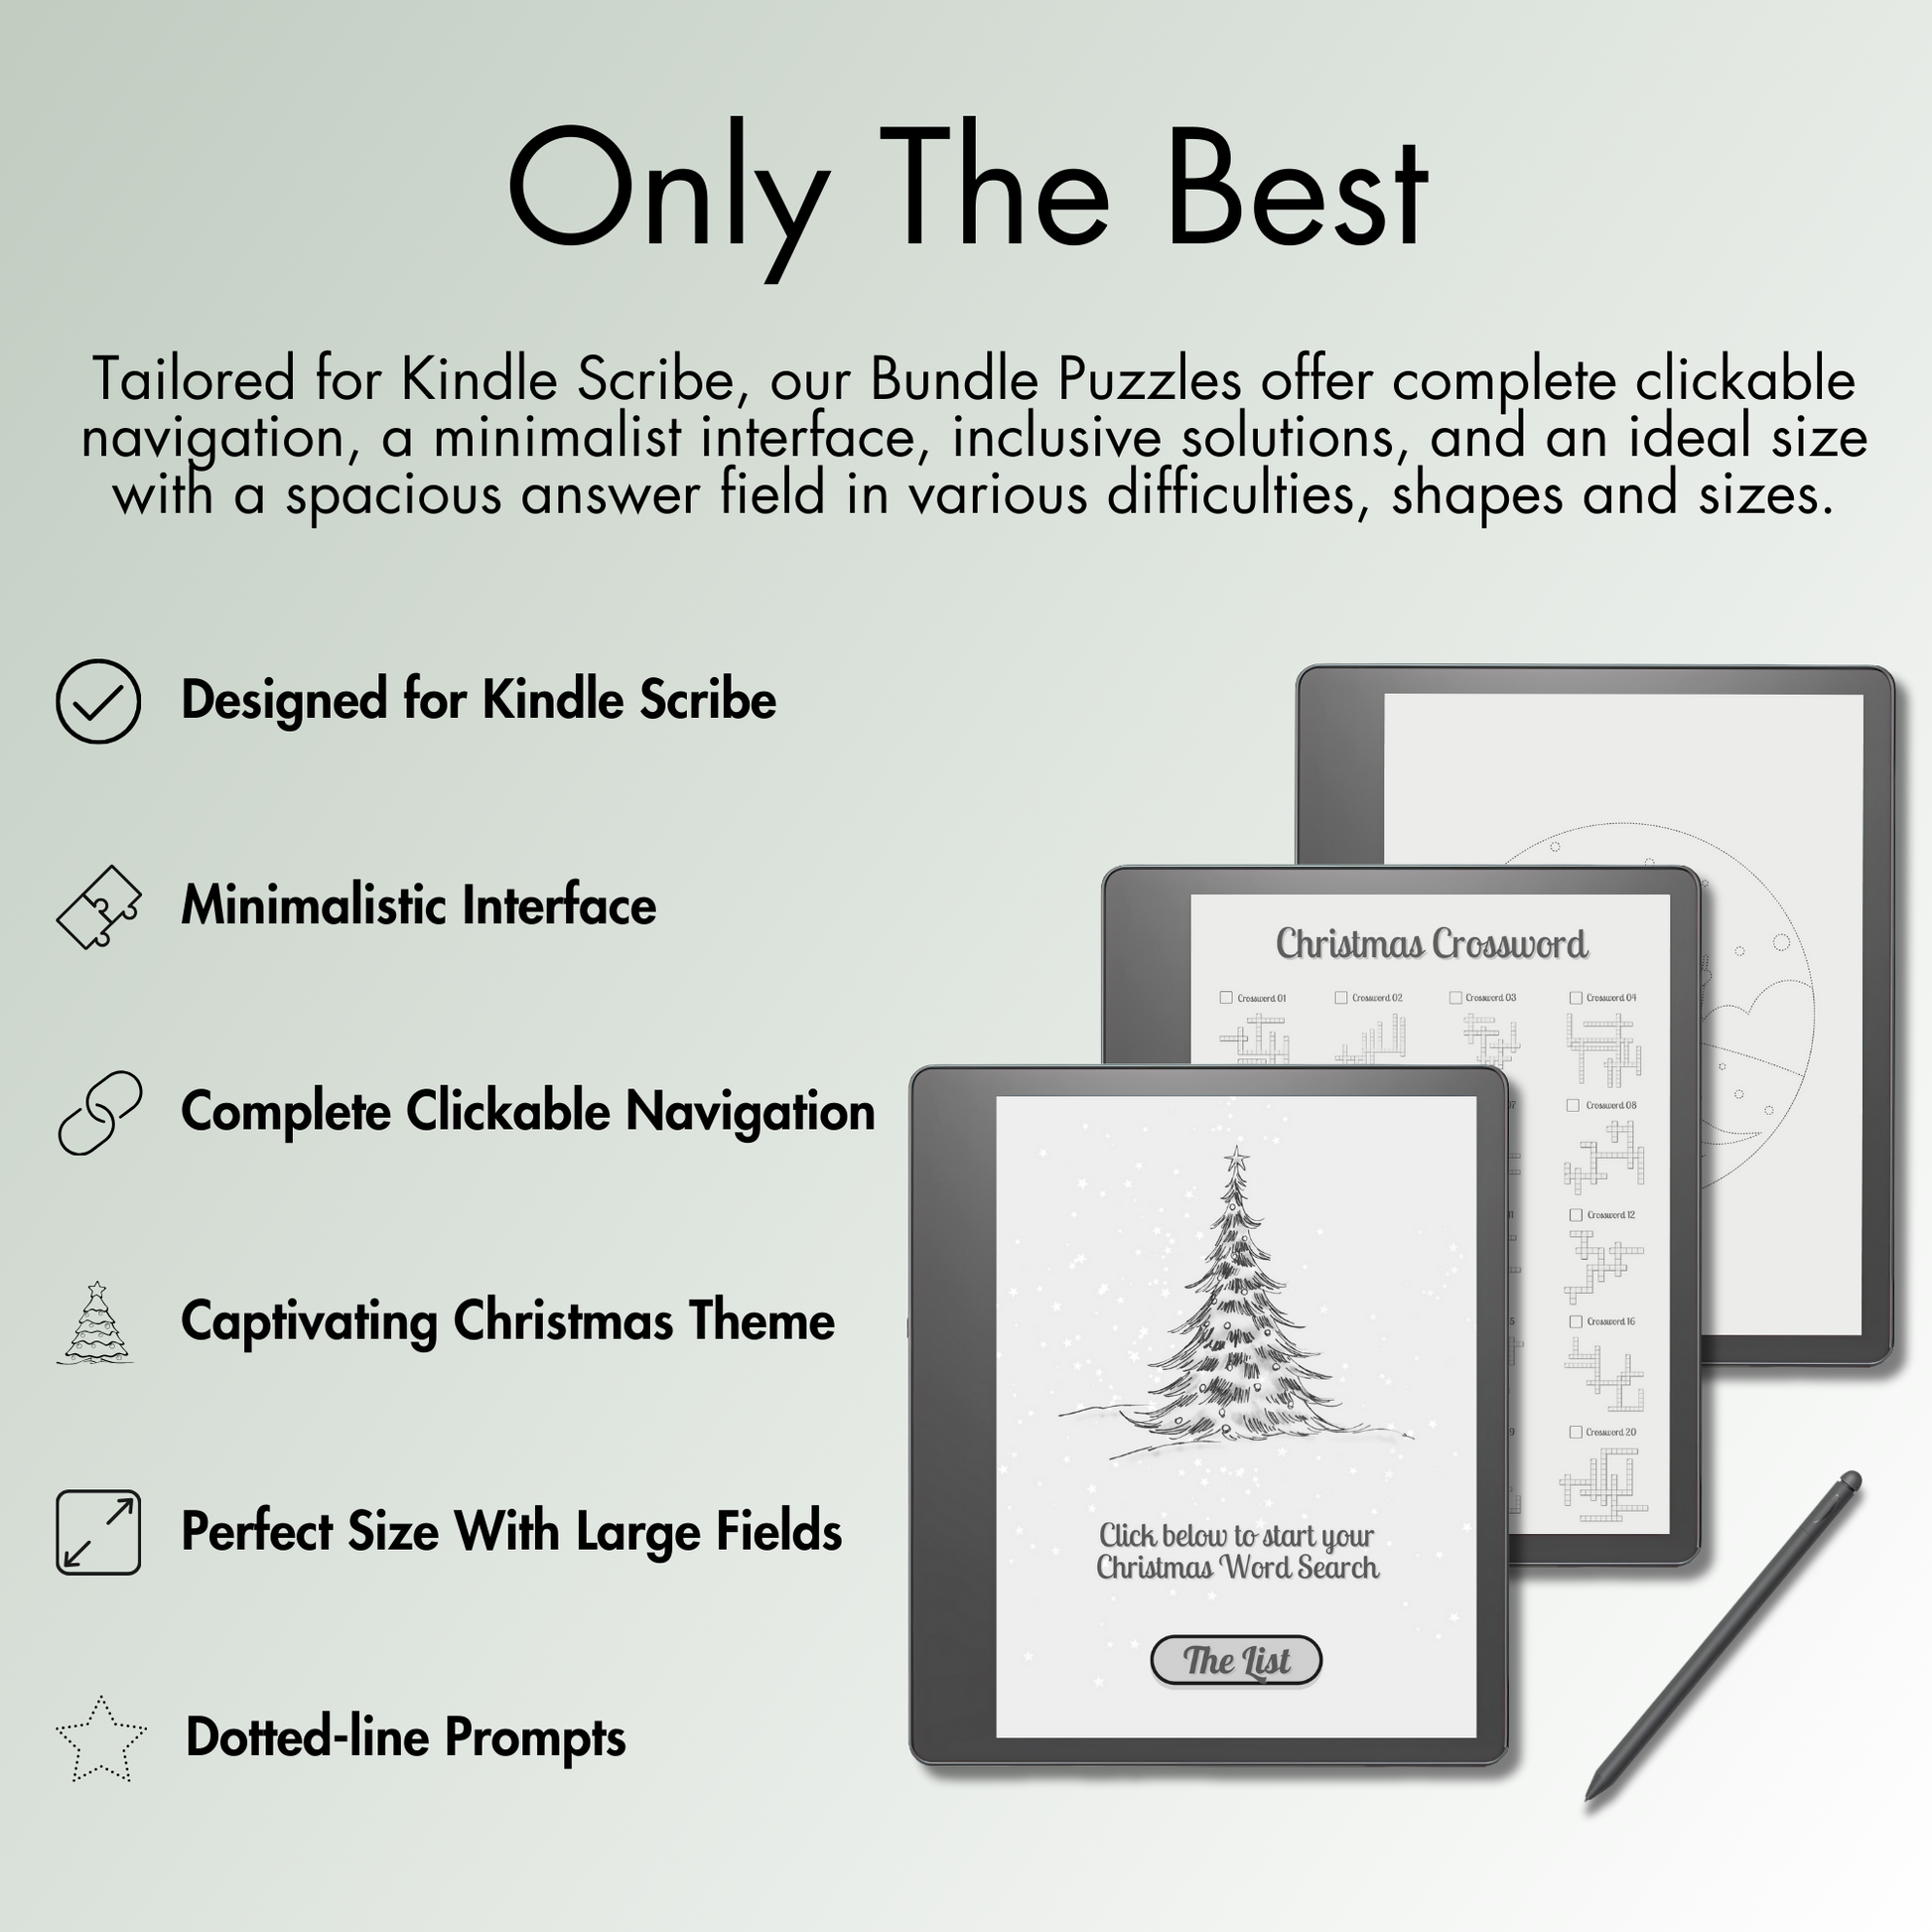 The Bundle offers complete clickable navigation, a minimalist interface, inclusive solutions, and an ideal size with a spacious answer field in various holiday-themed difficulties, shapes, and sizes for Kindle Scribe's e-ink screen, perfect for adding festive cheer to your holiday season.